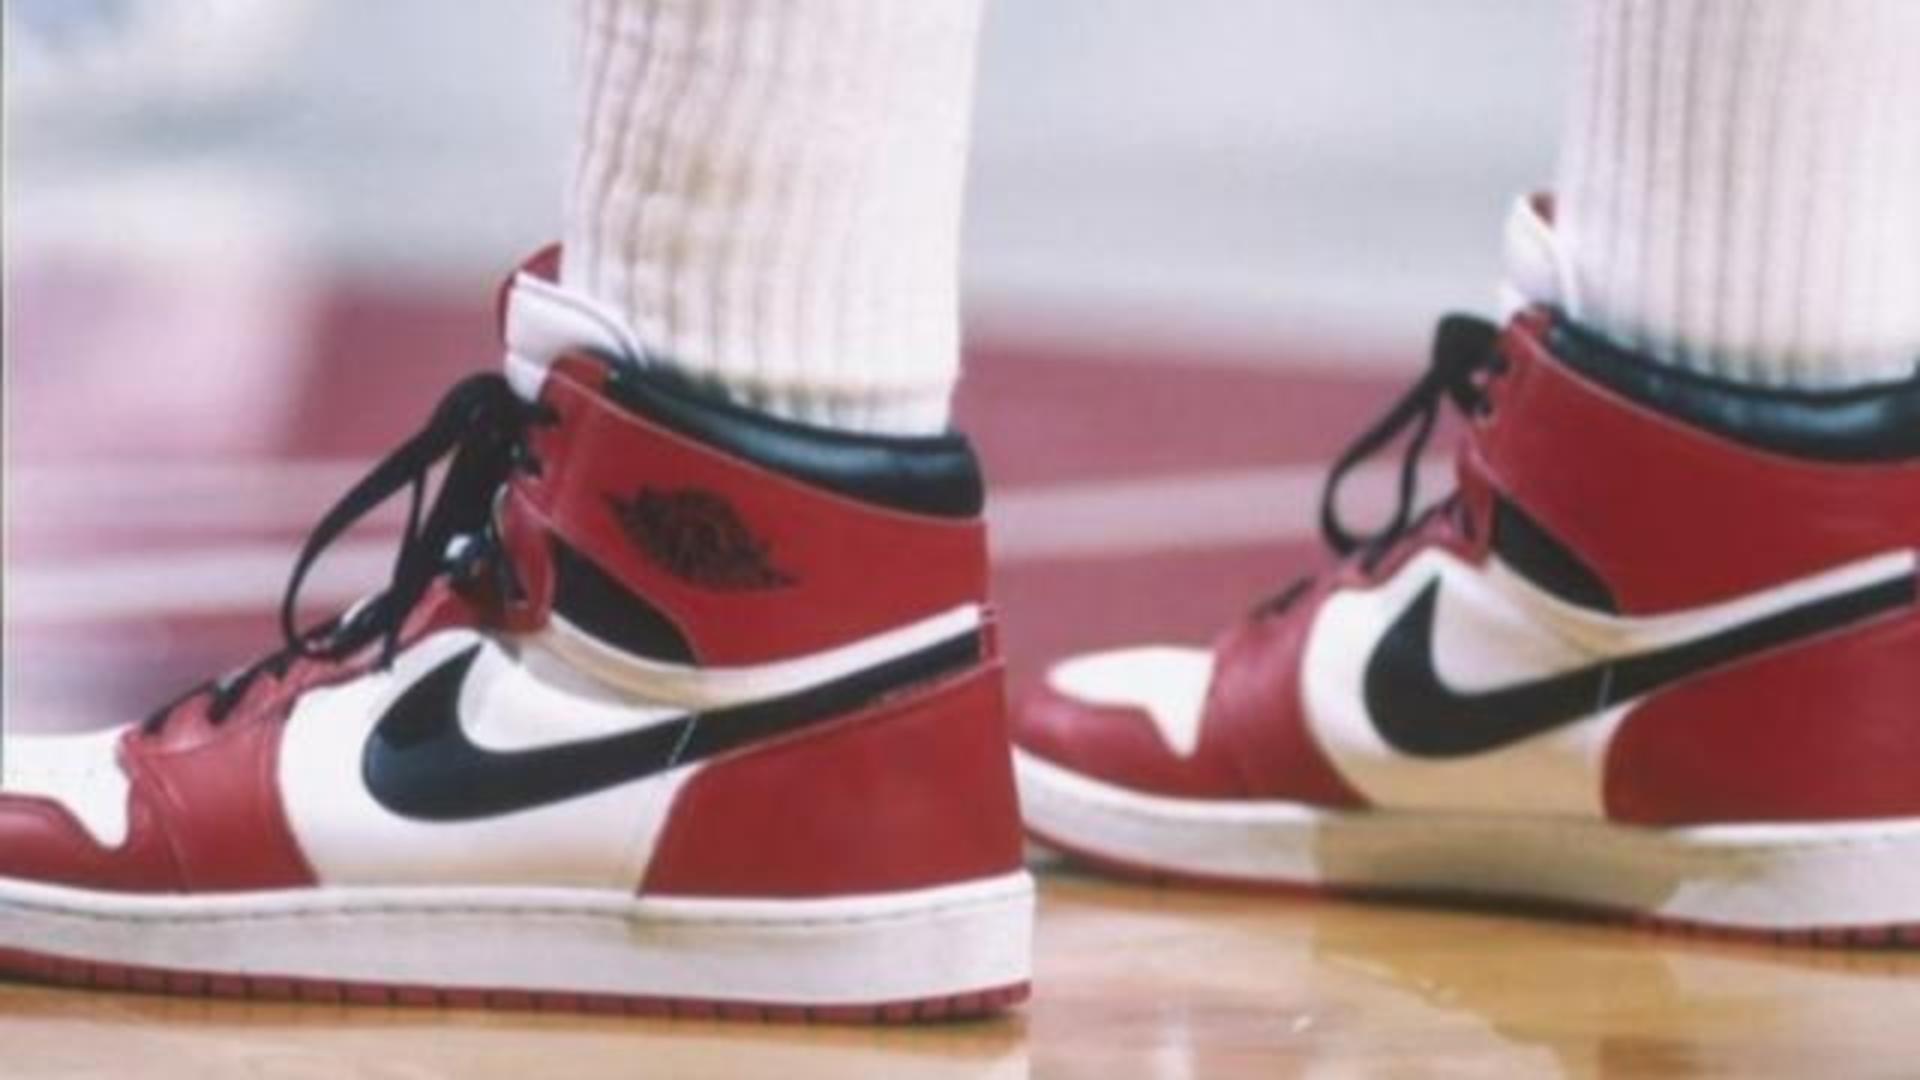 Michael Jordan changed the world': the true story behind Nike movie Air, Movies